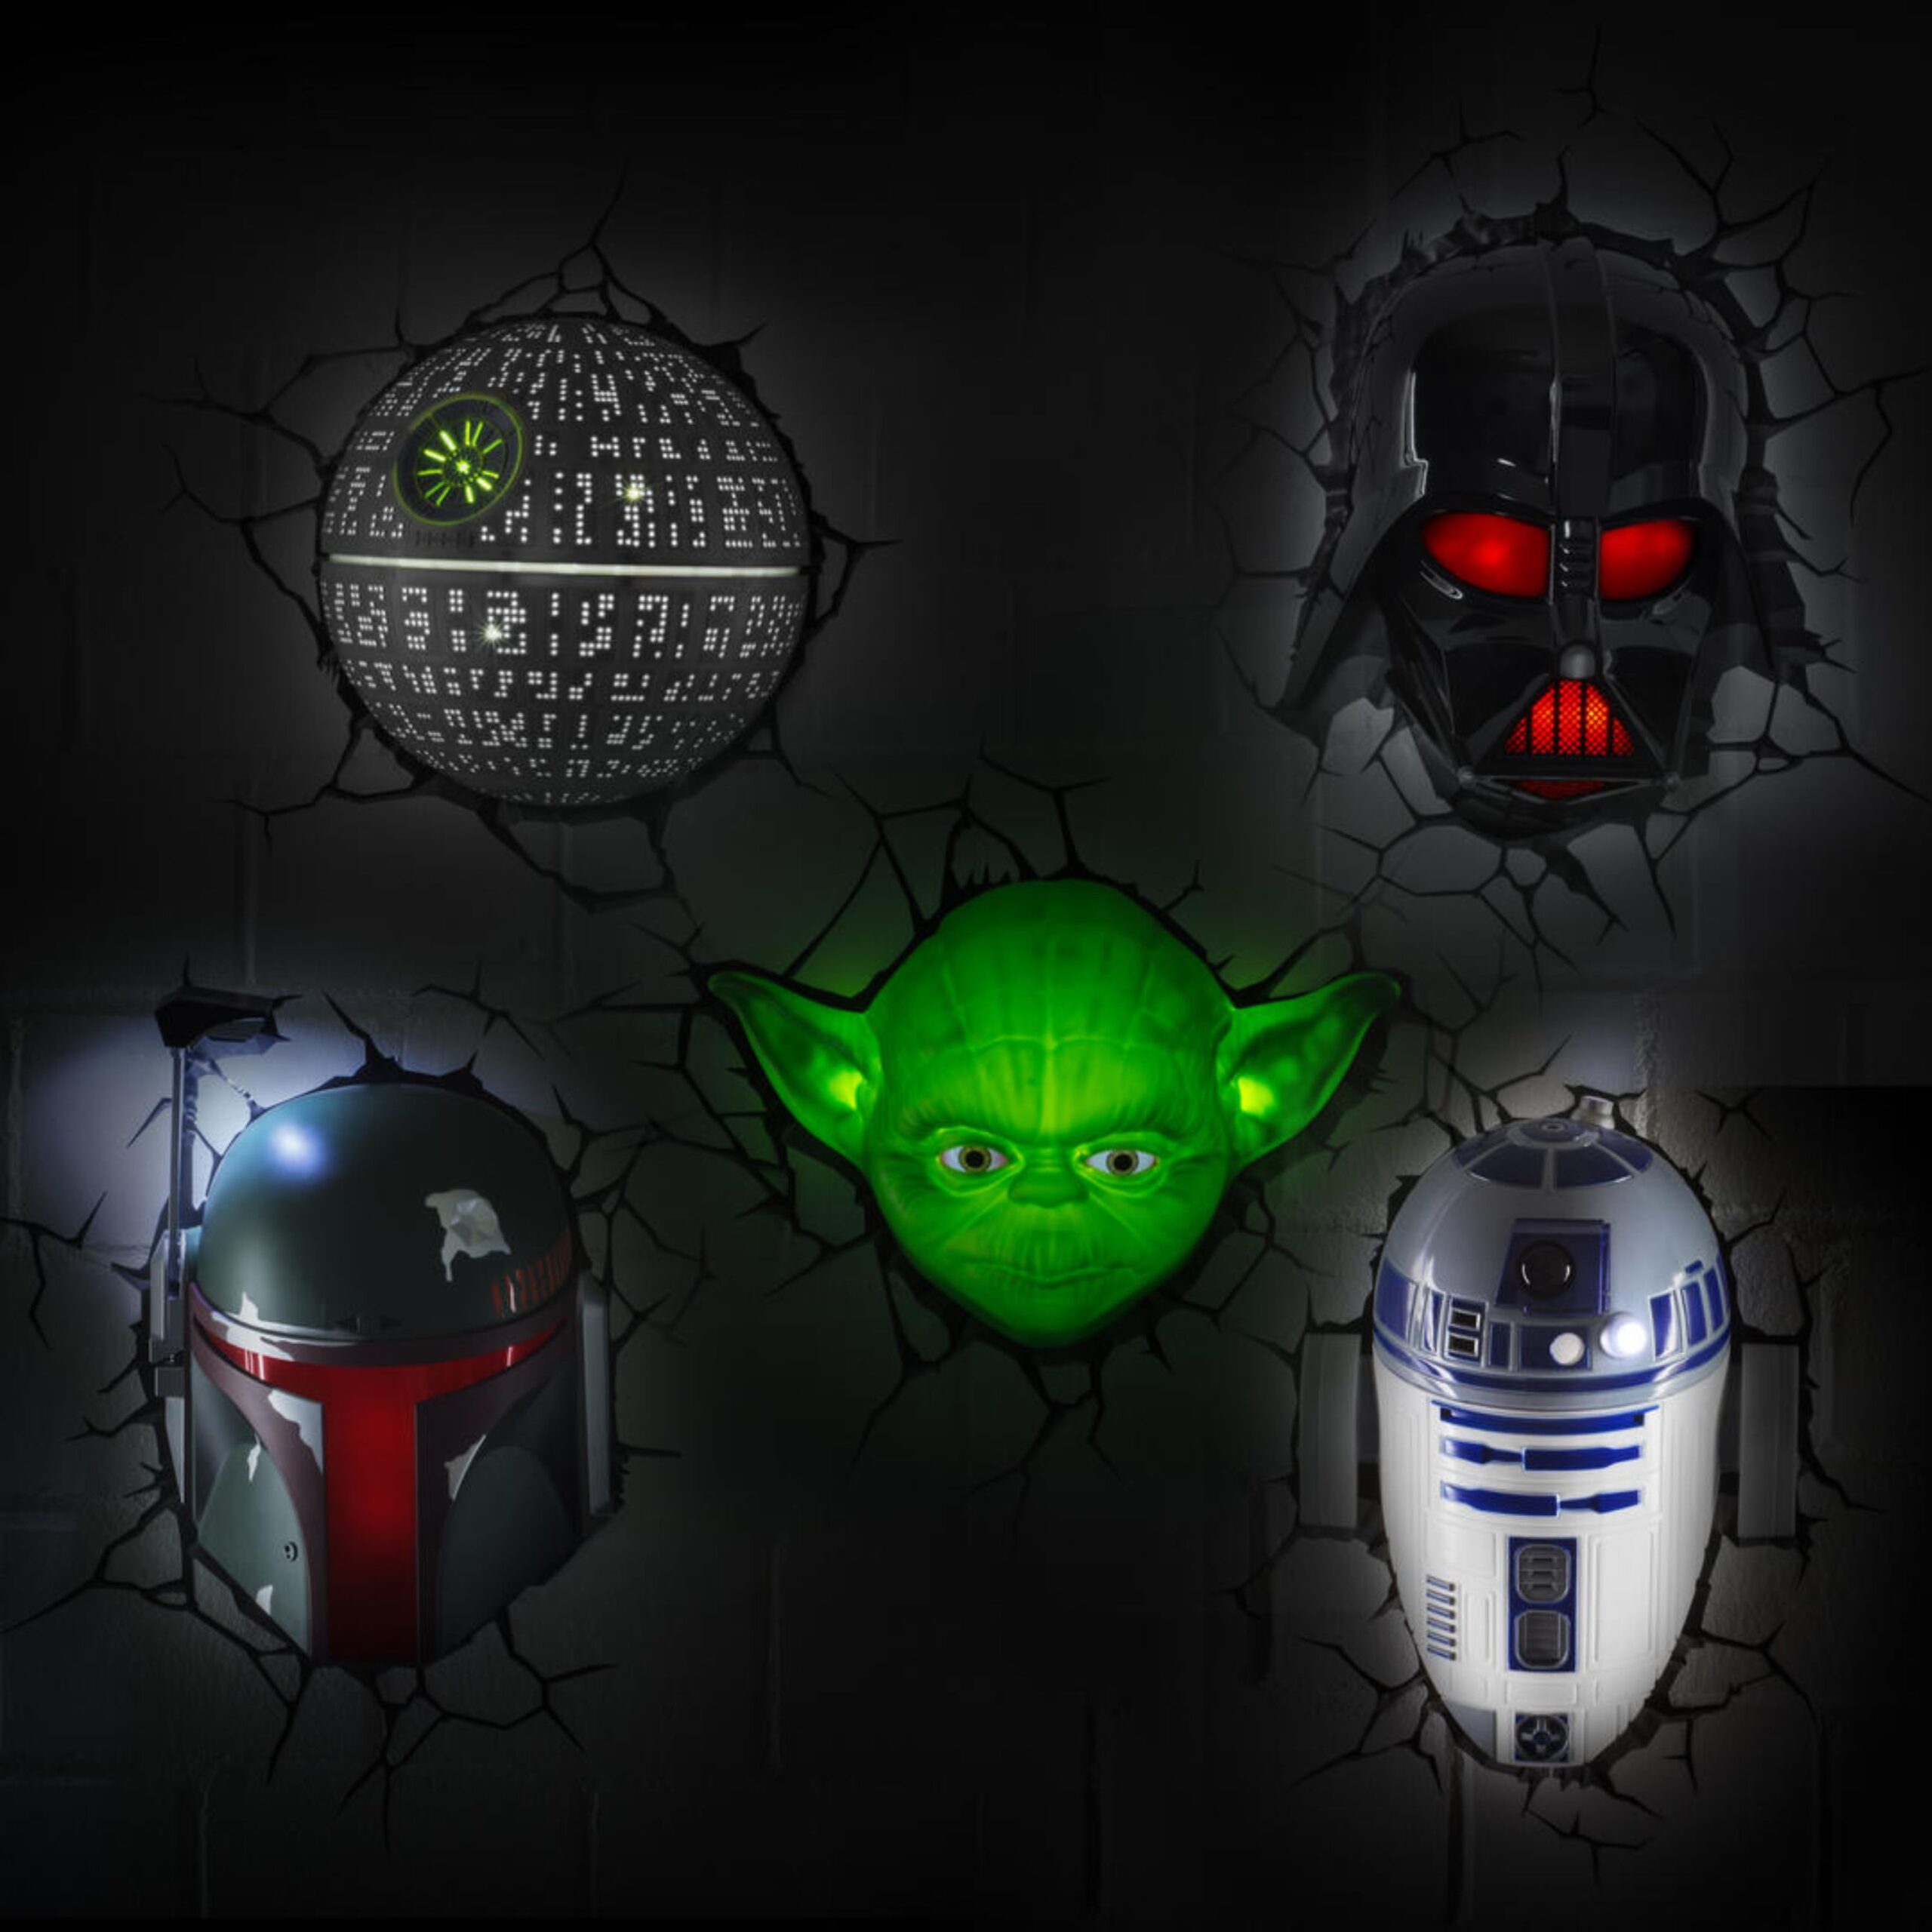 Star Wars wall sconces